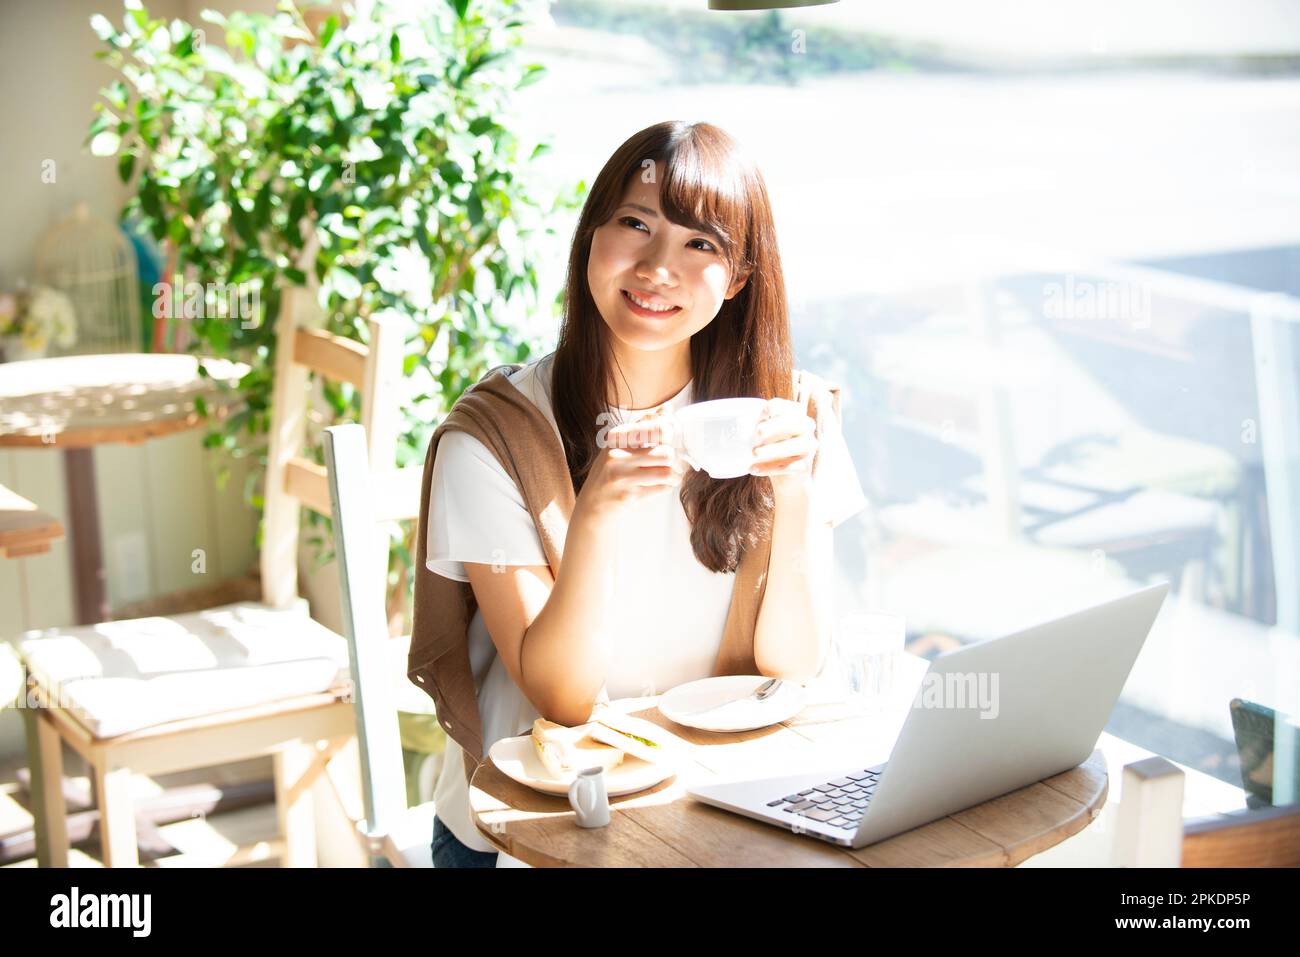 Woman drinking coffee at a café Stock Photo